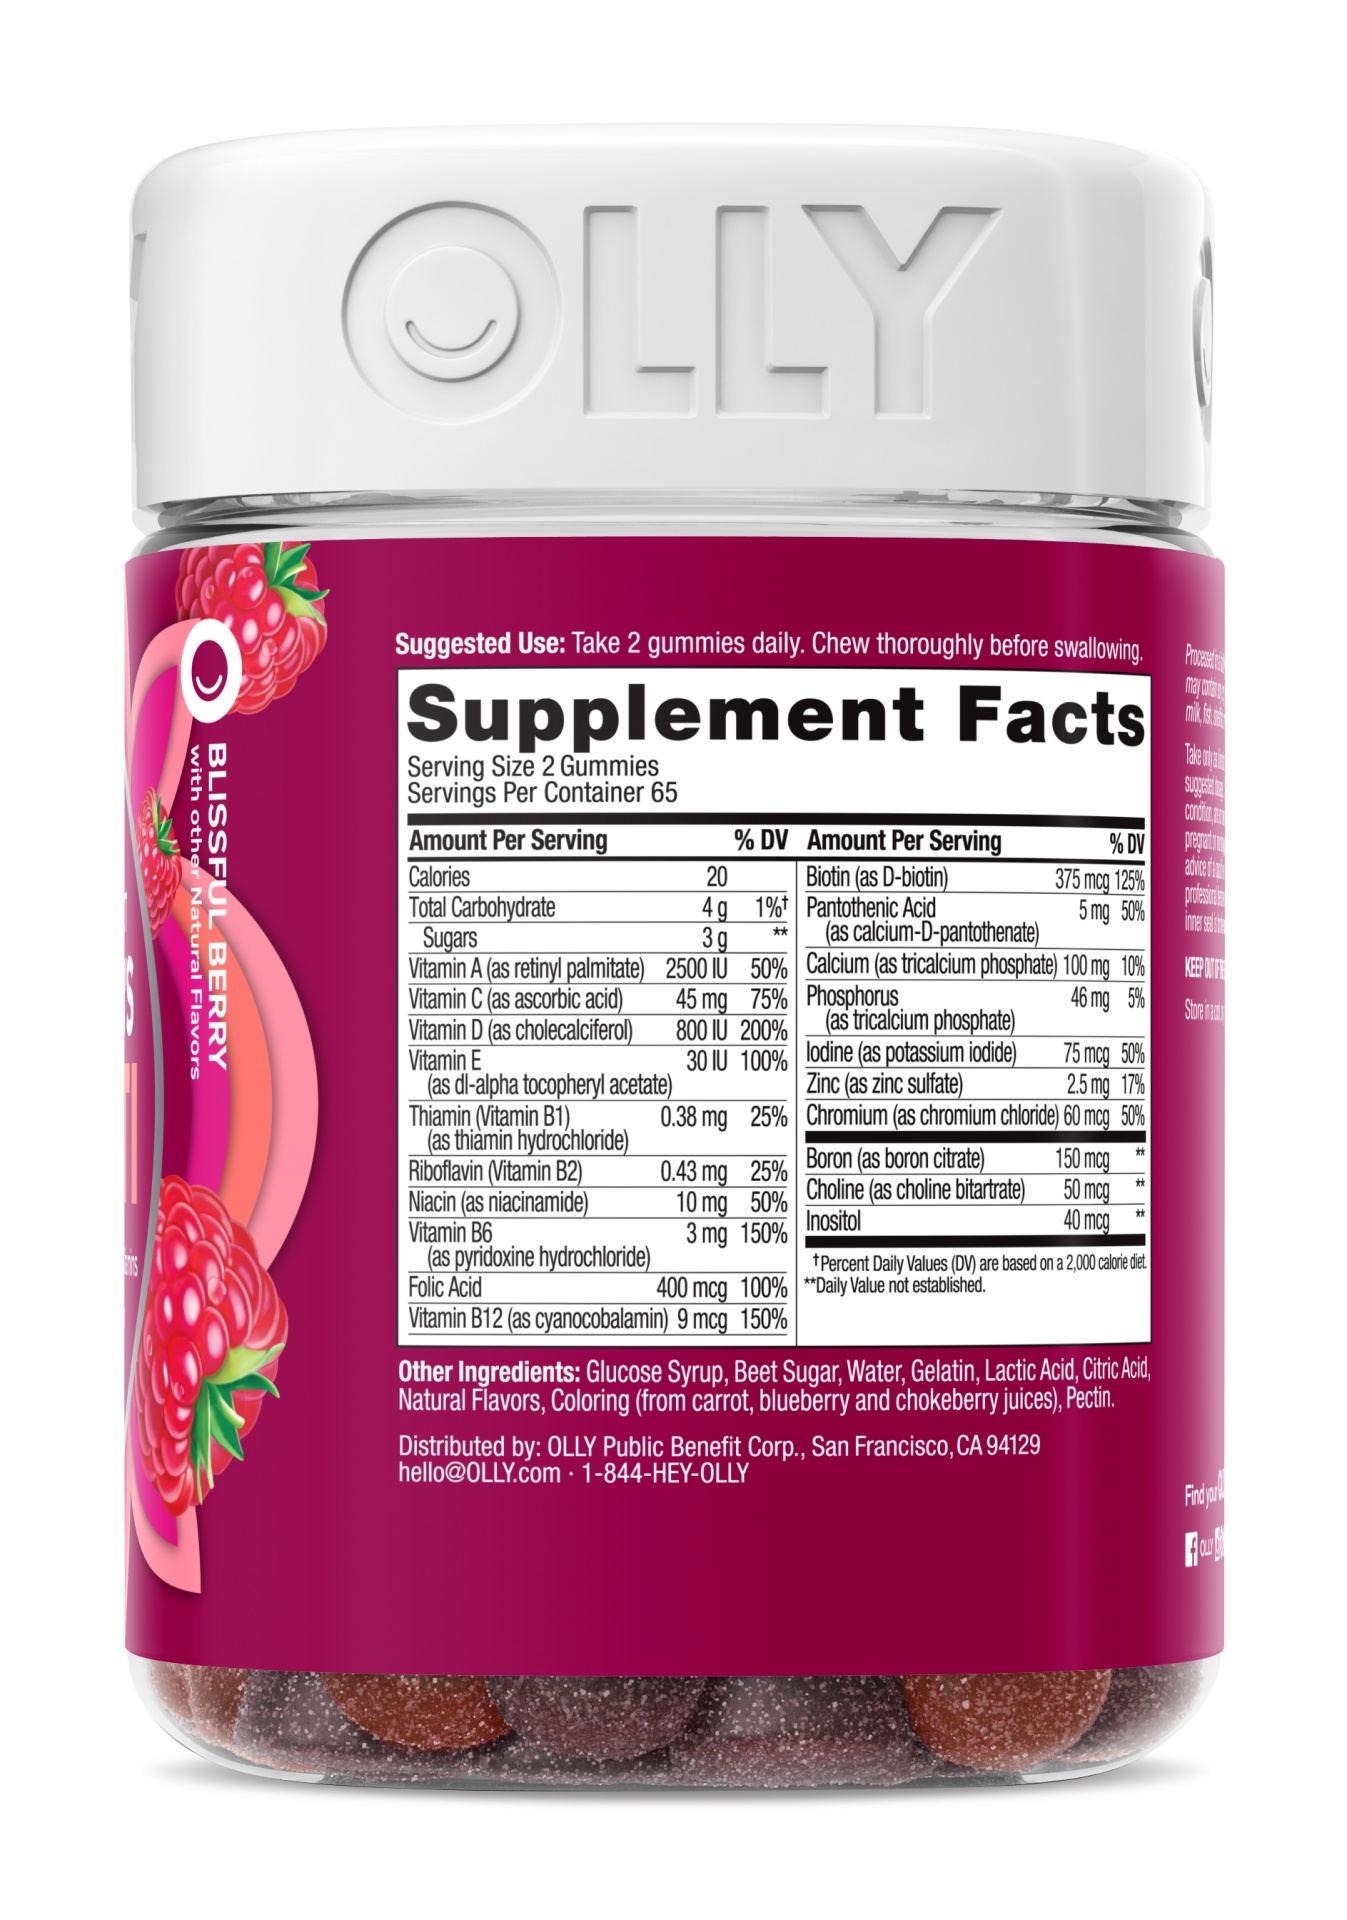 olly vitamins review